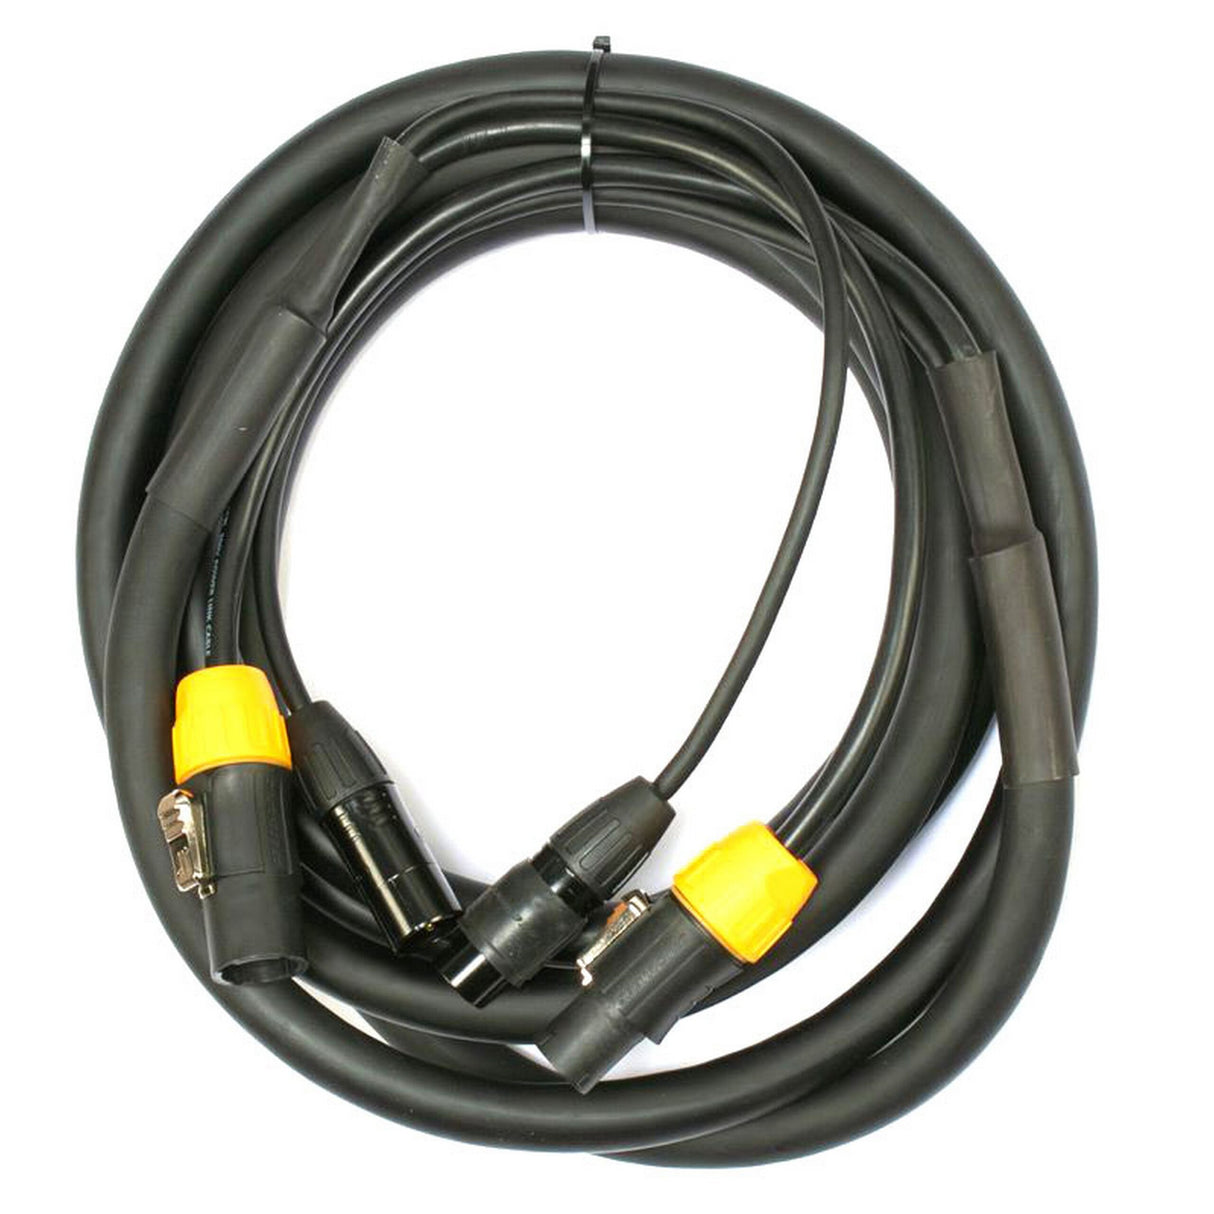 Accu Cable AC3PTRUE12 12-Foot Female to Male 3-Pin DMX/Locking Power Link Cable